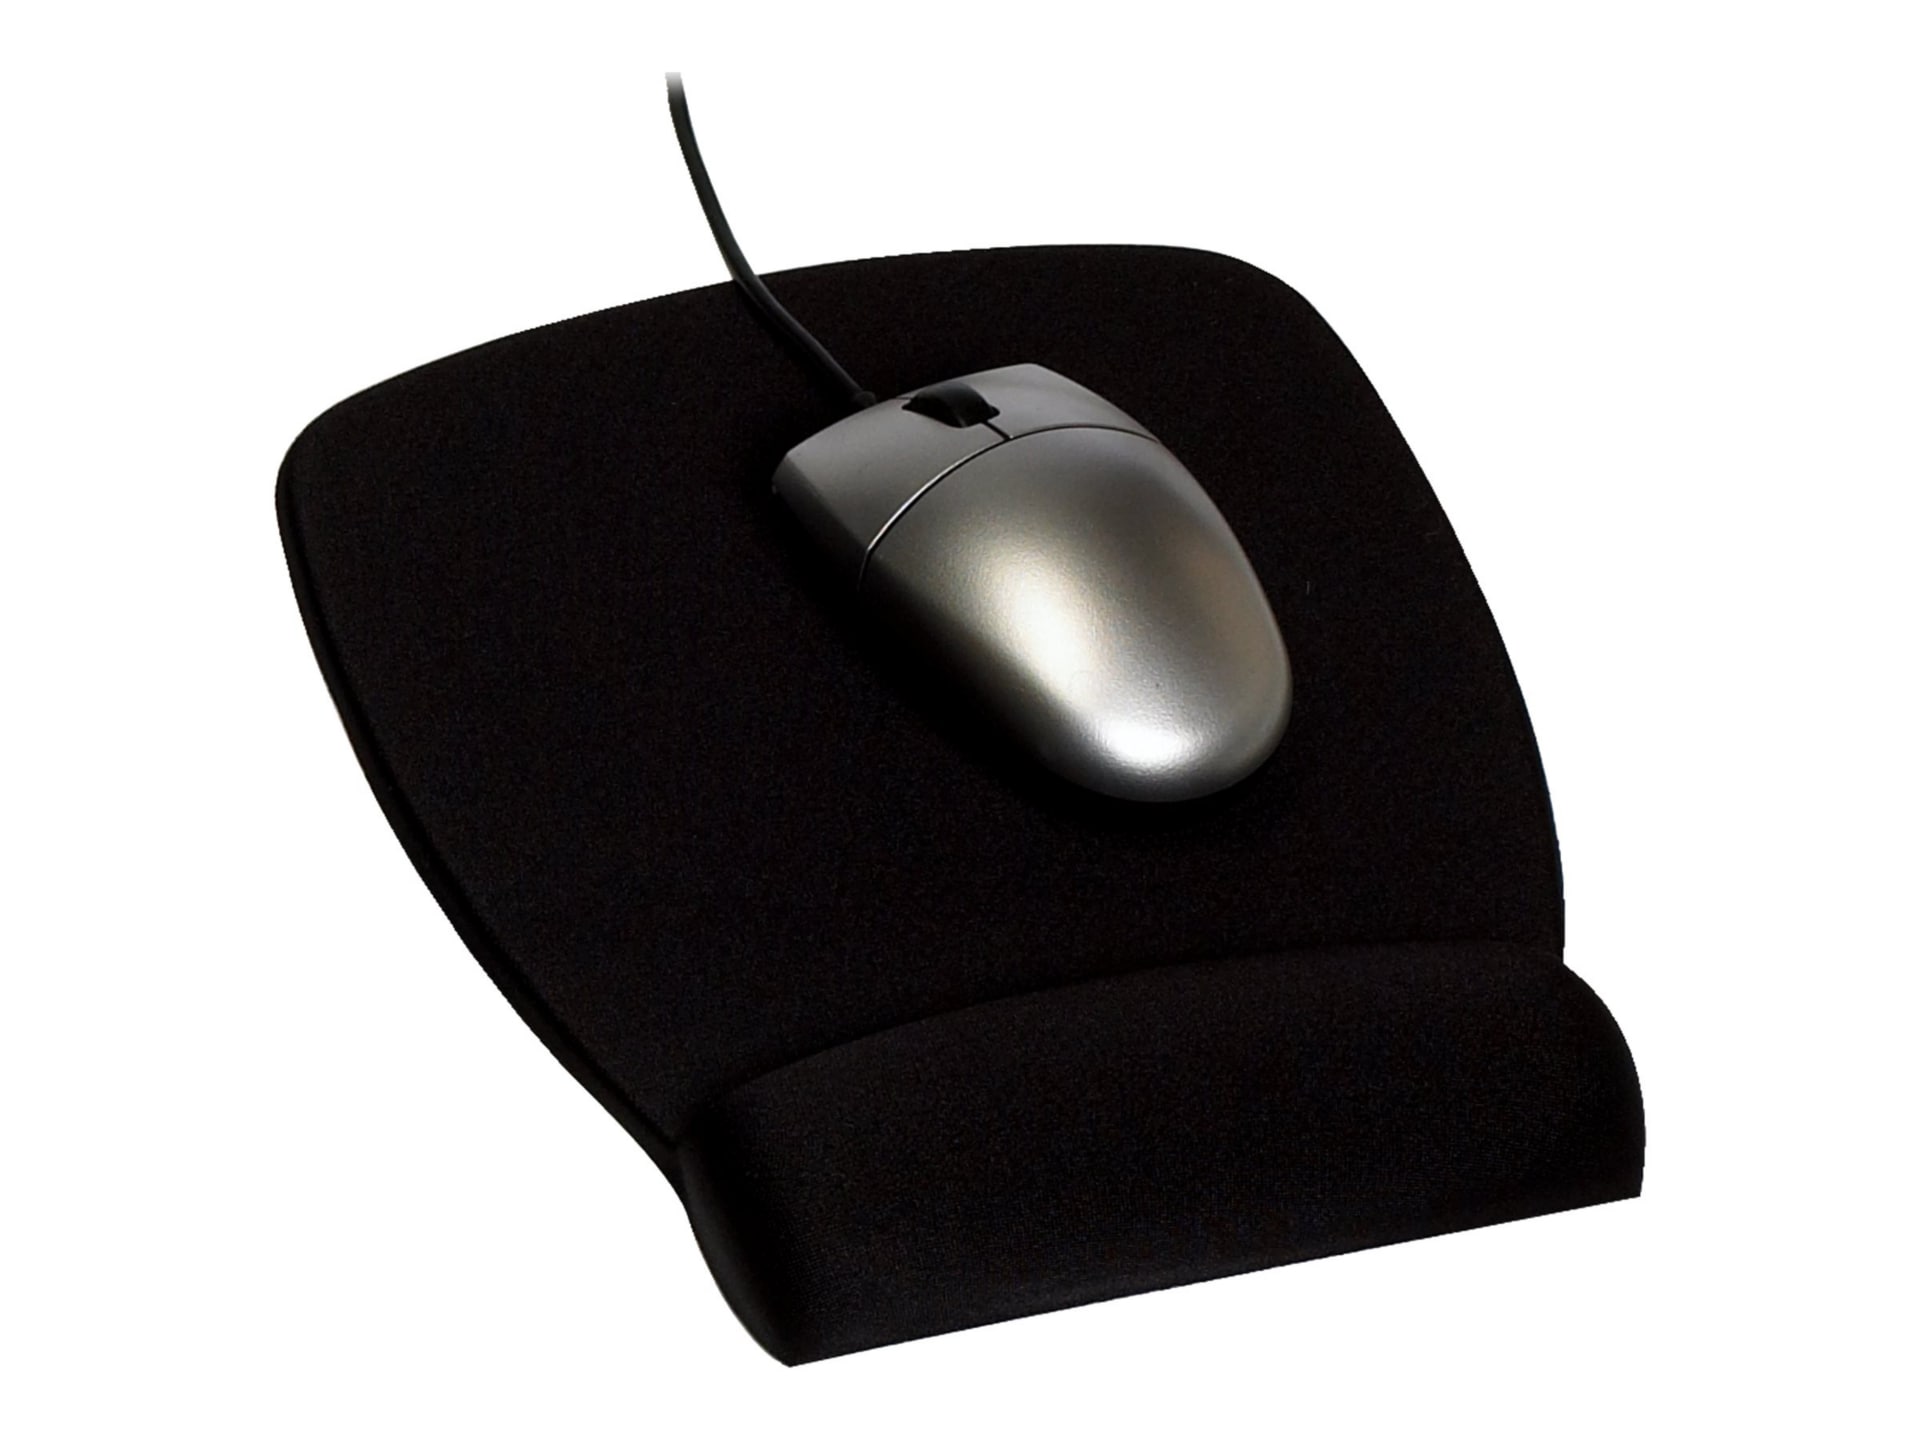 3M mouse pad with wrist pillow